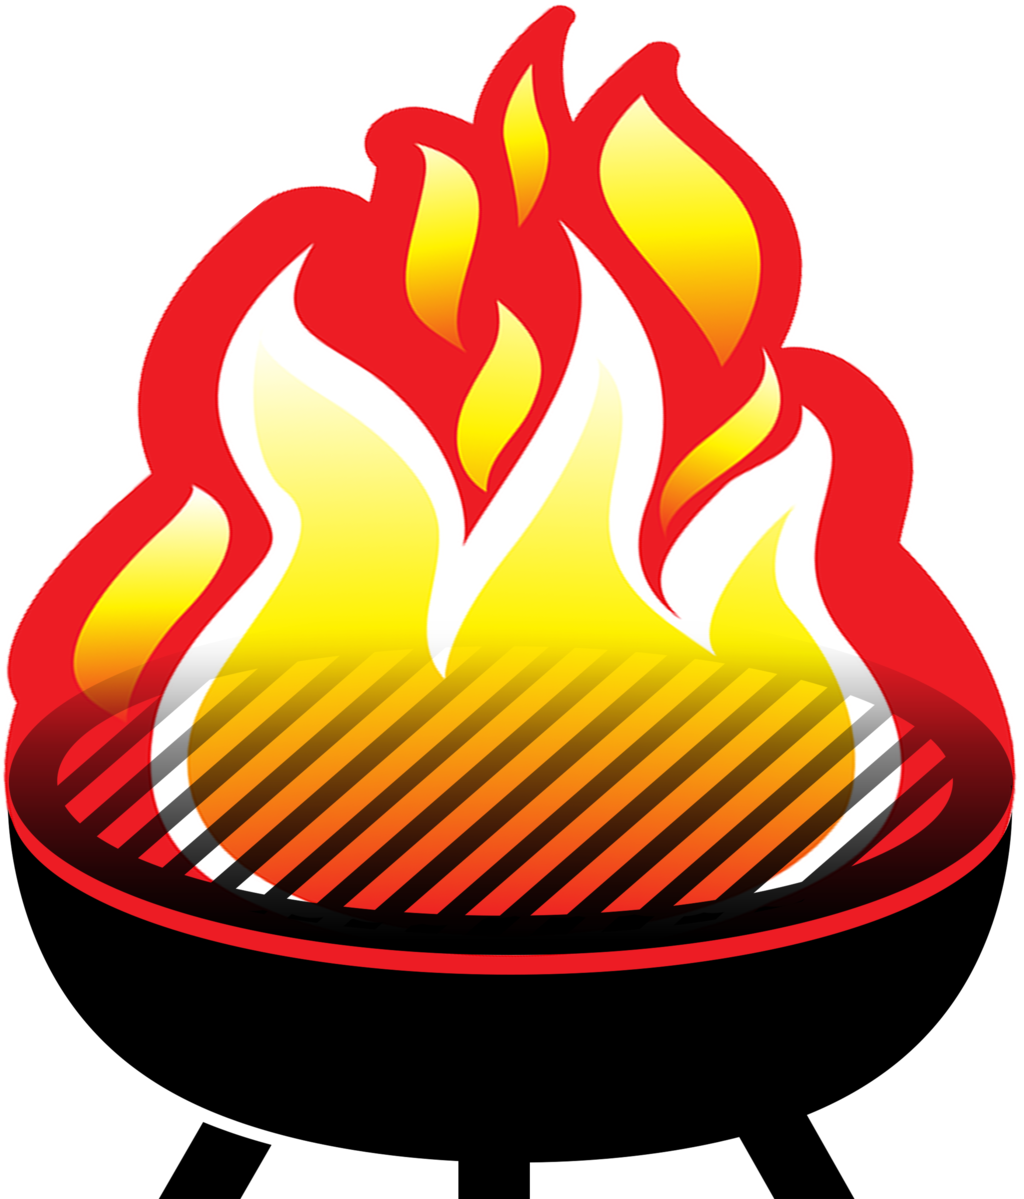 Download PNG image - Barbecue Flame PNG 